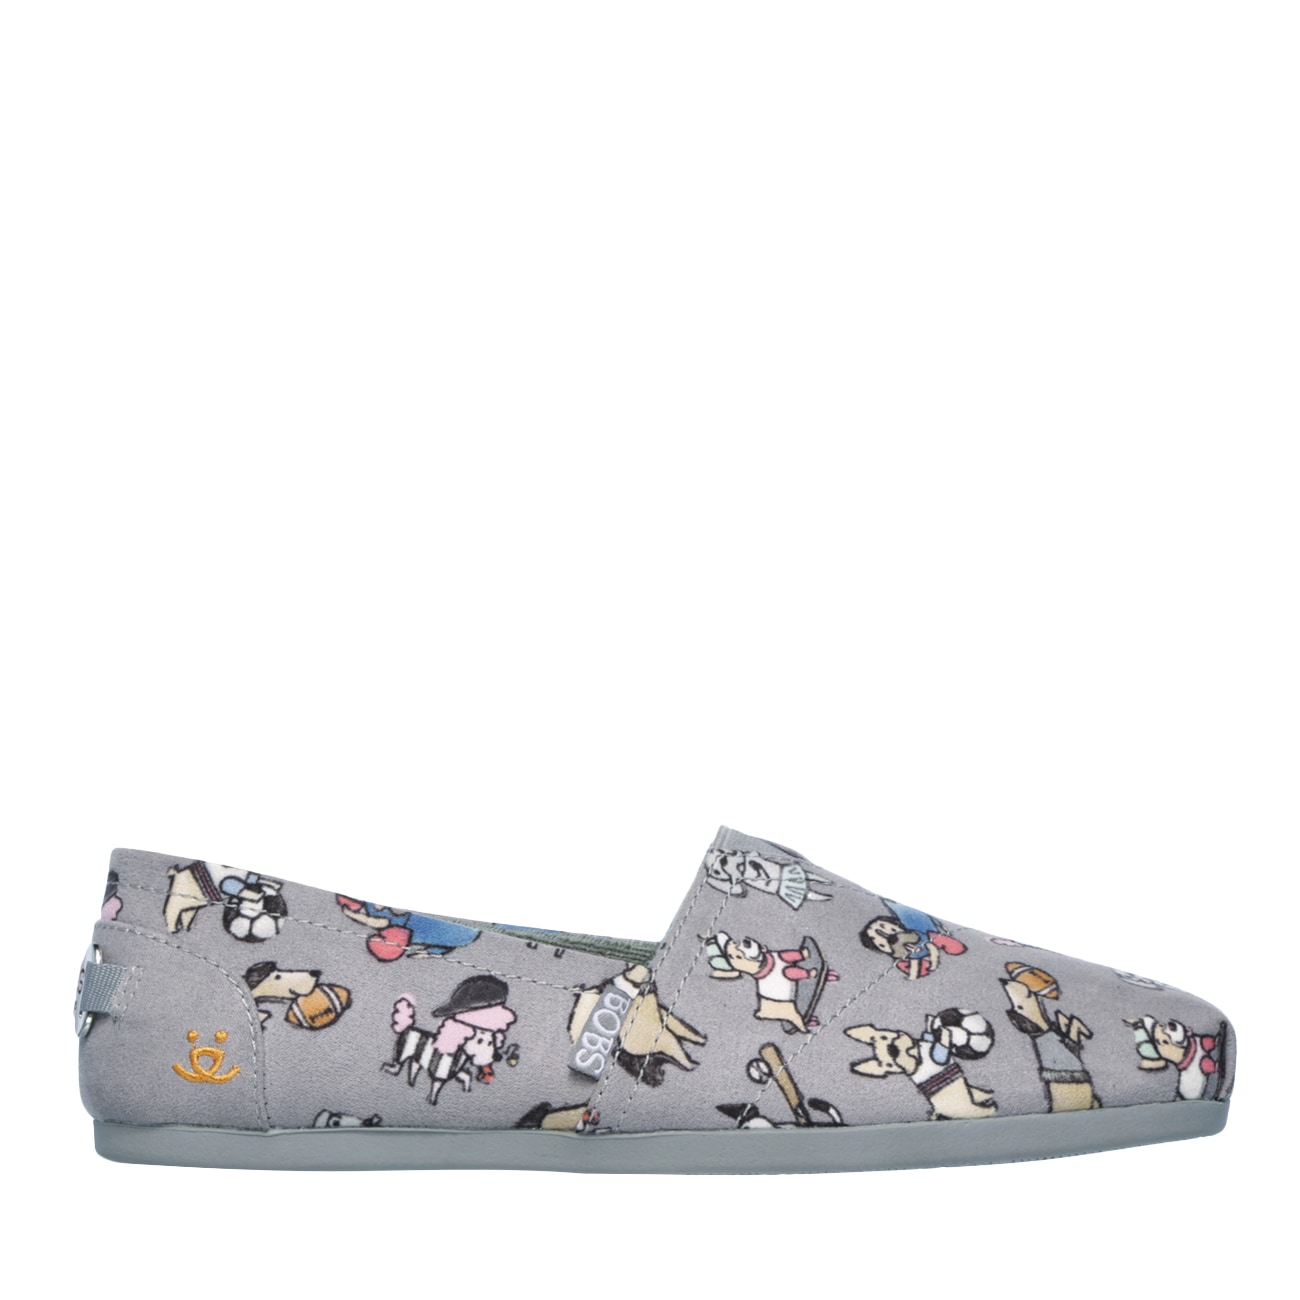 BOBS By Skechers Plush Sport Dogs Slip On | The Shoe Company